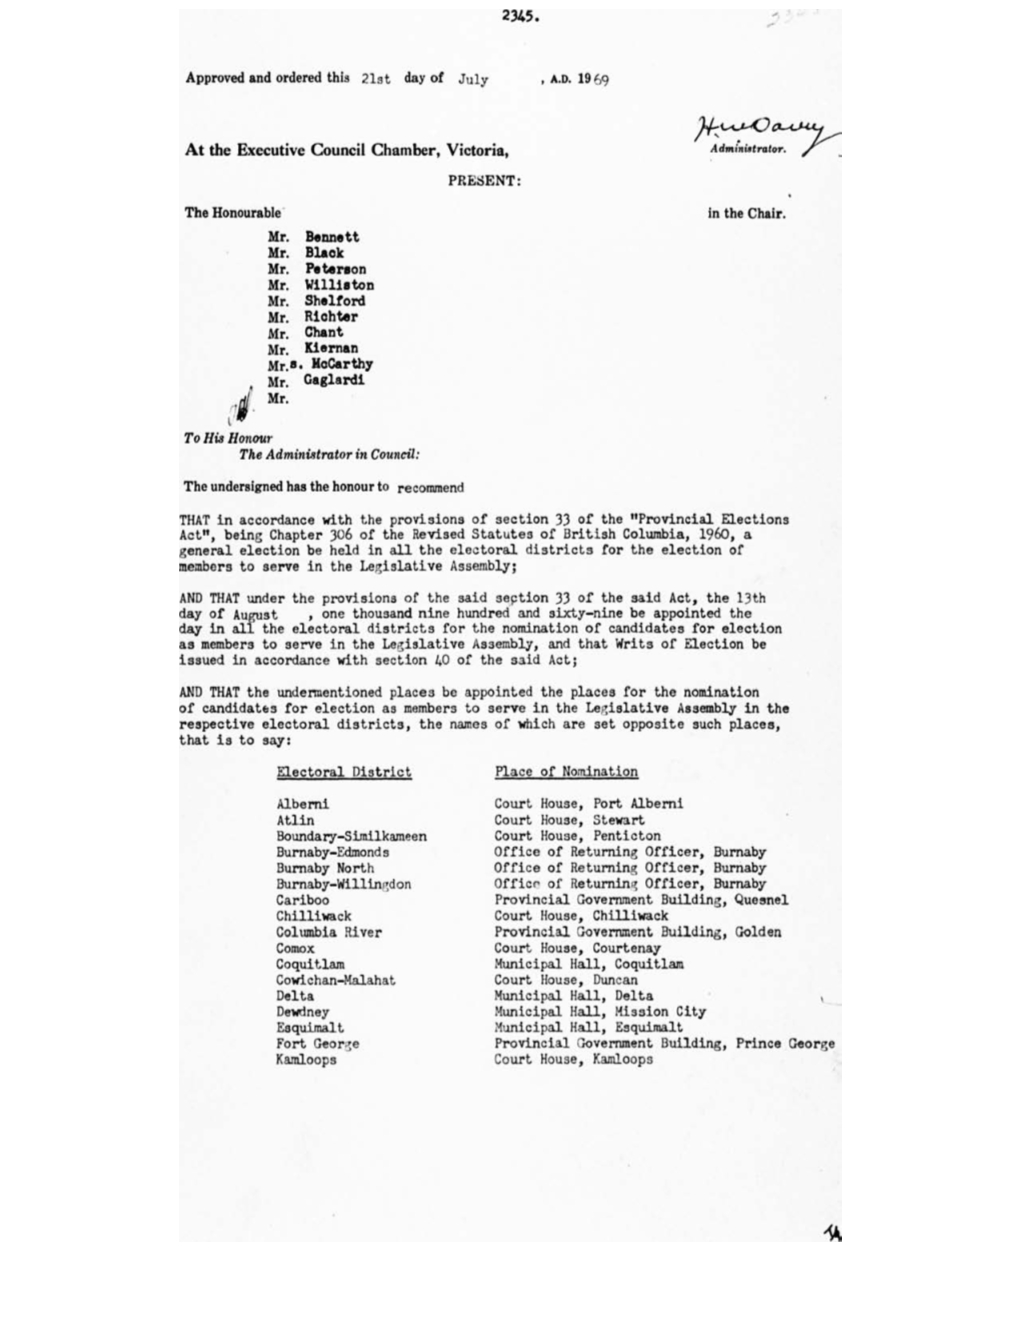 Order in Council 2345/1969